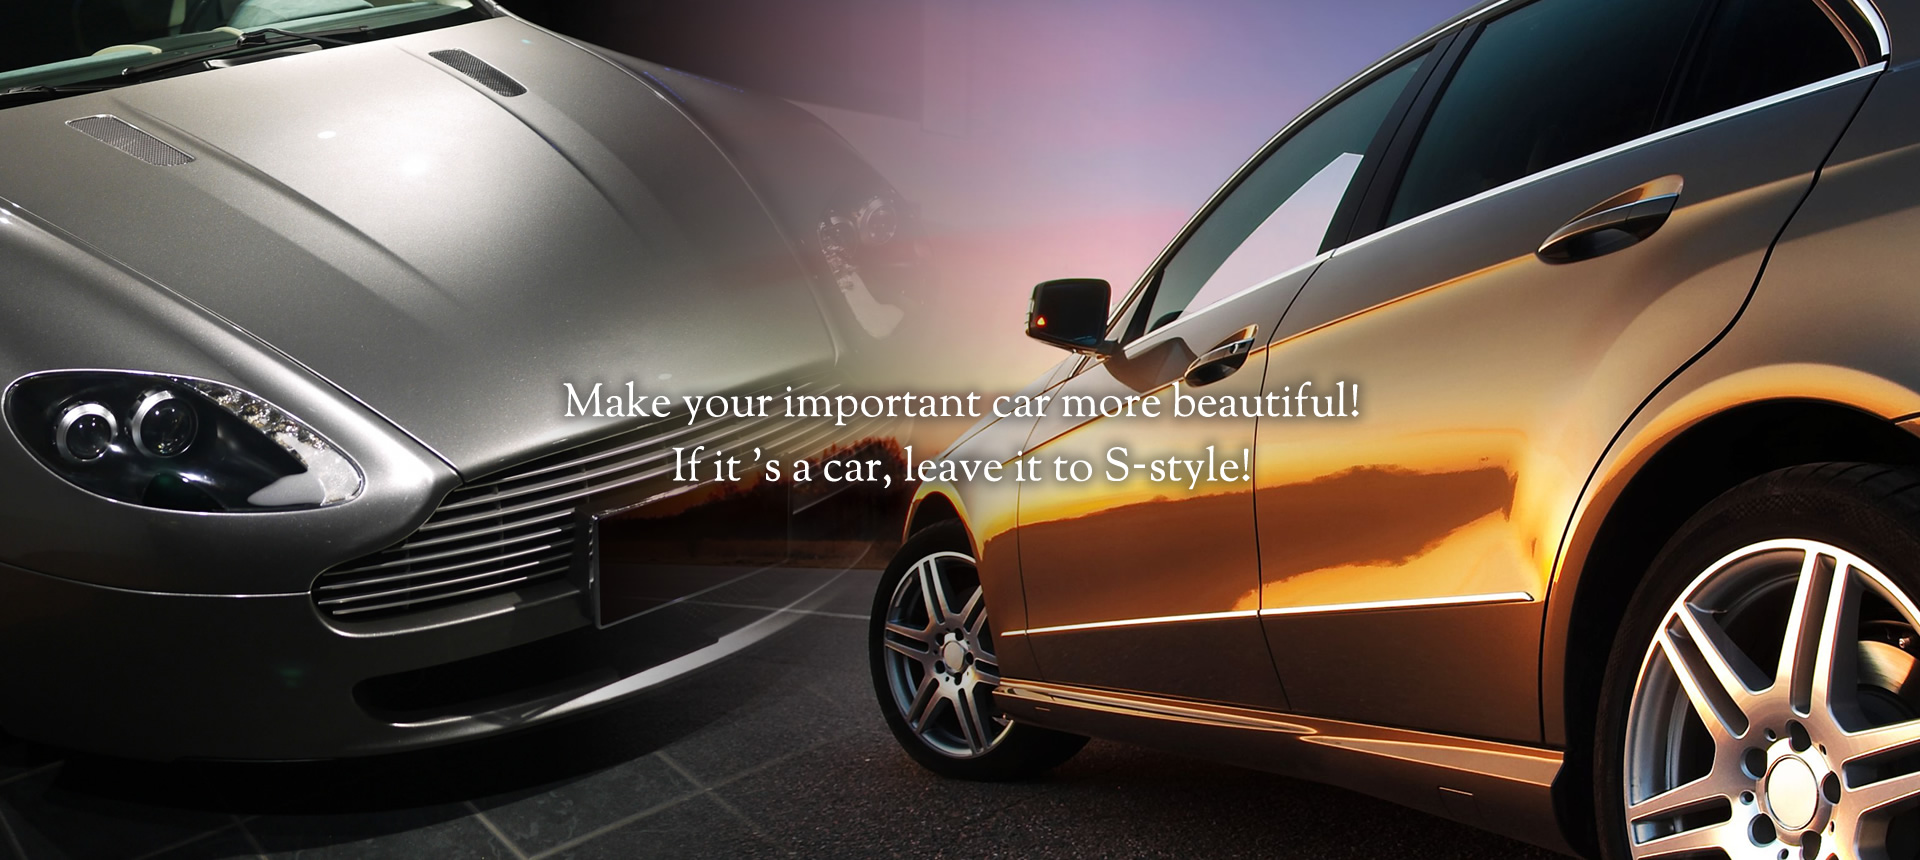 Make your important car more beautiful!